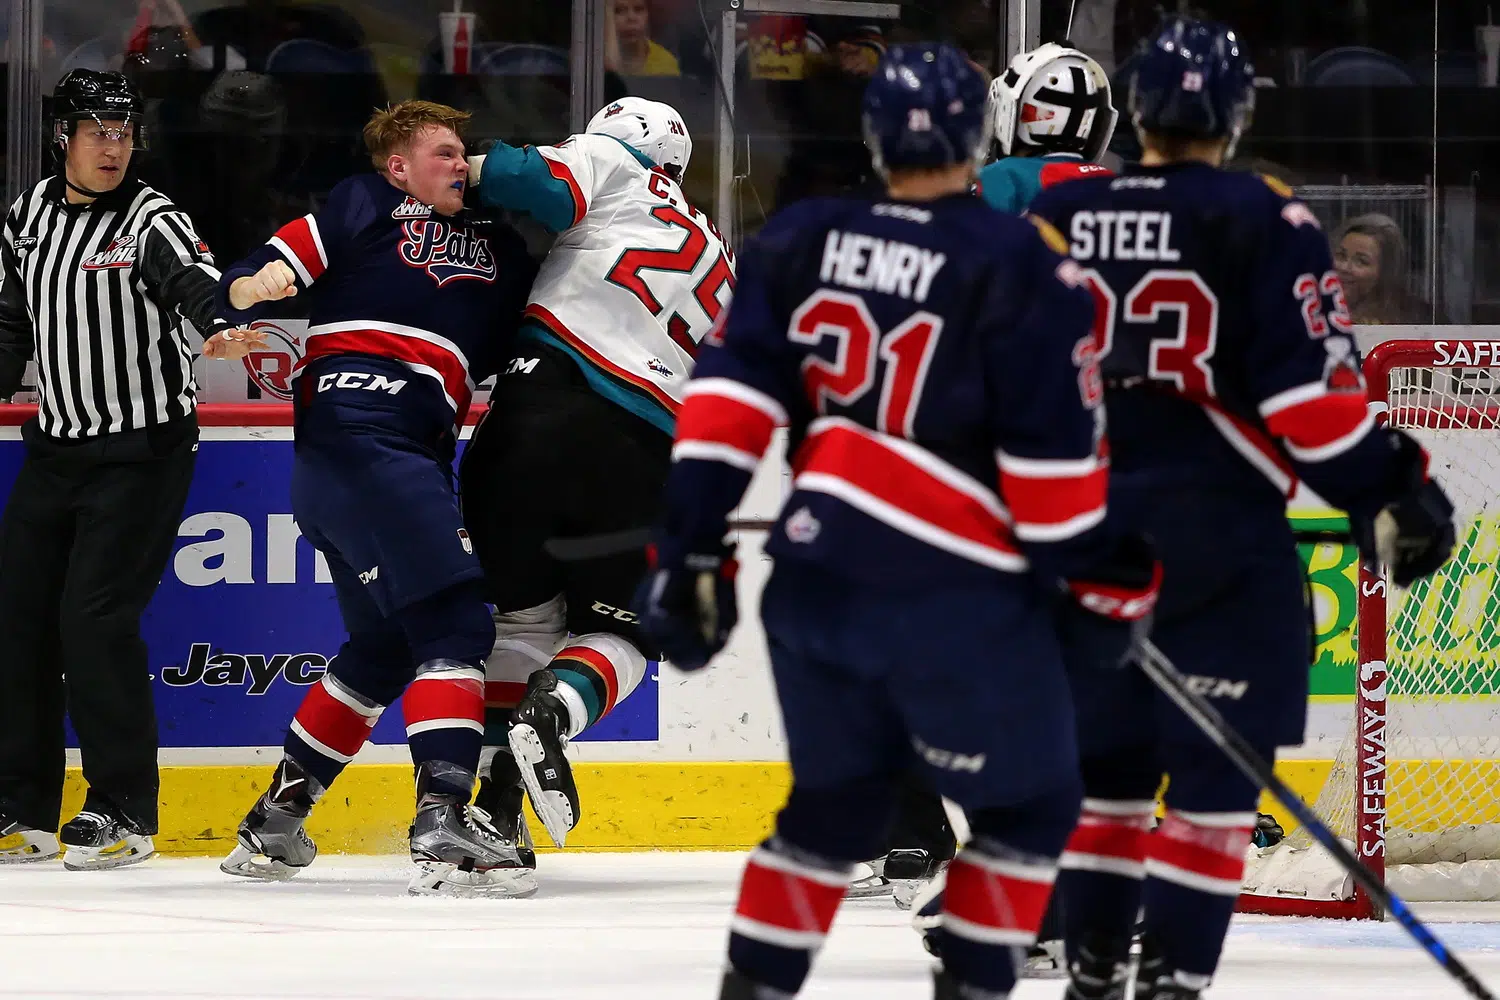 Teddies and fists fly in the Pats 7-5 loss to Kelowna